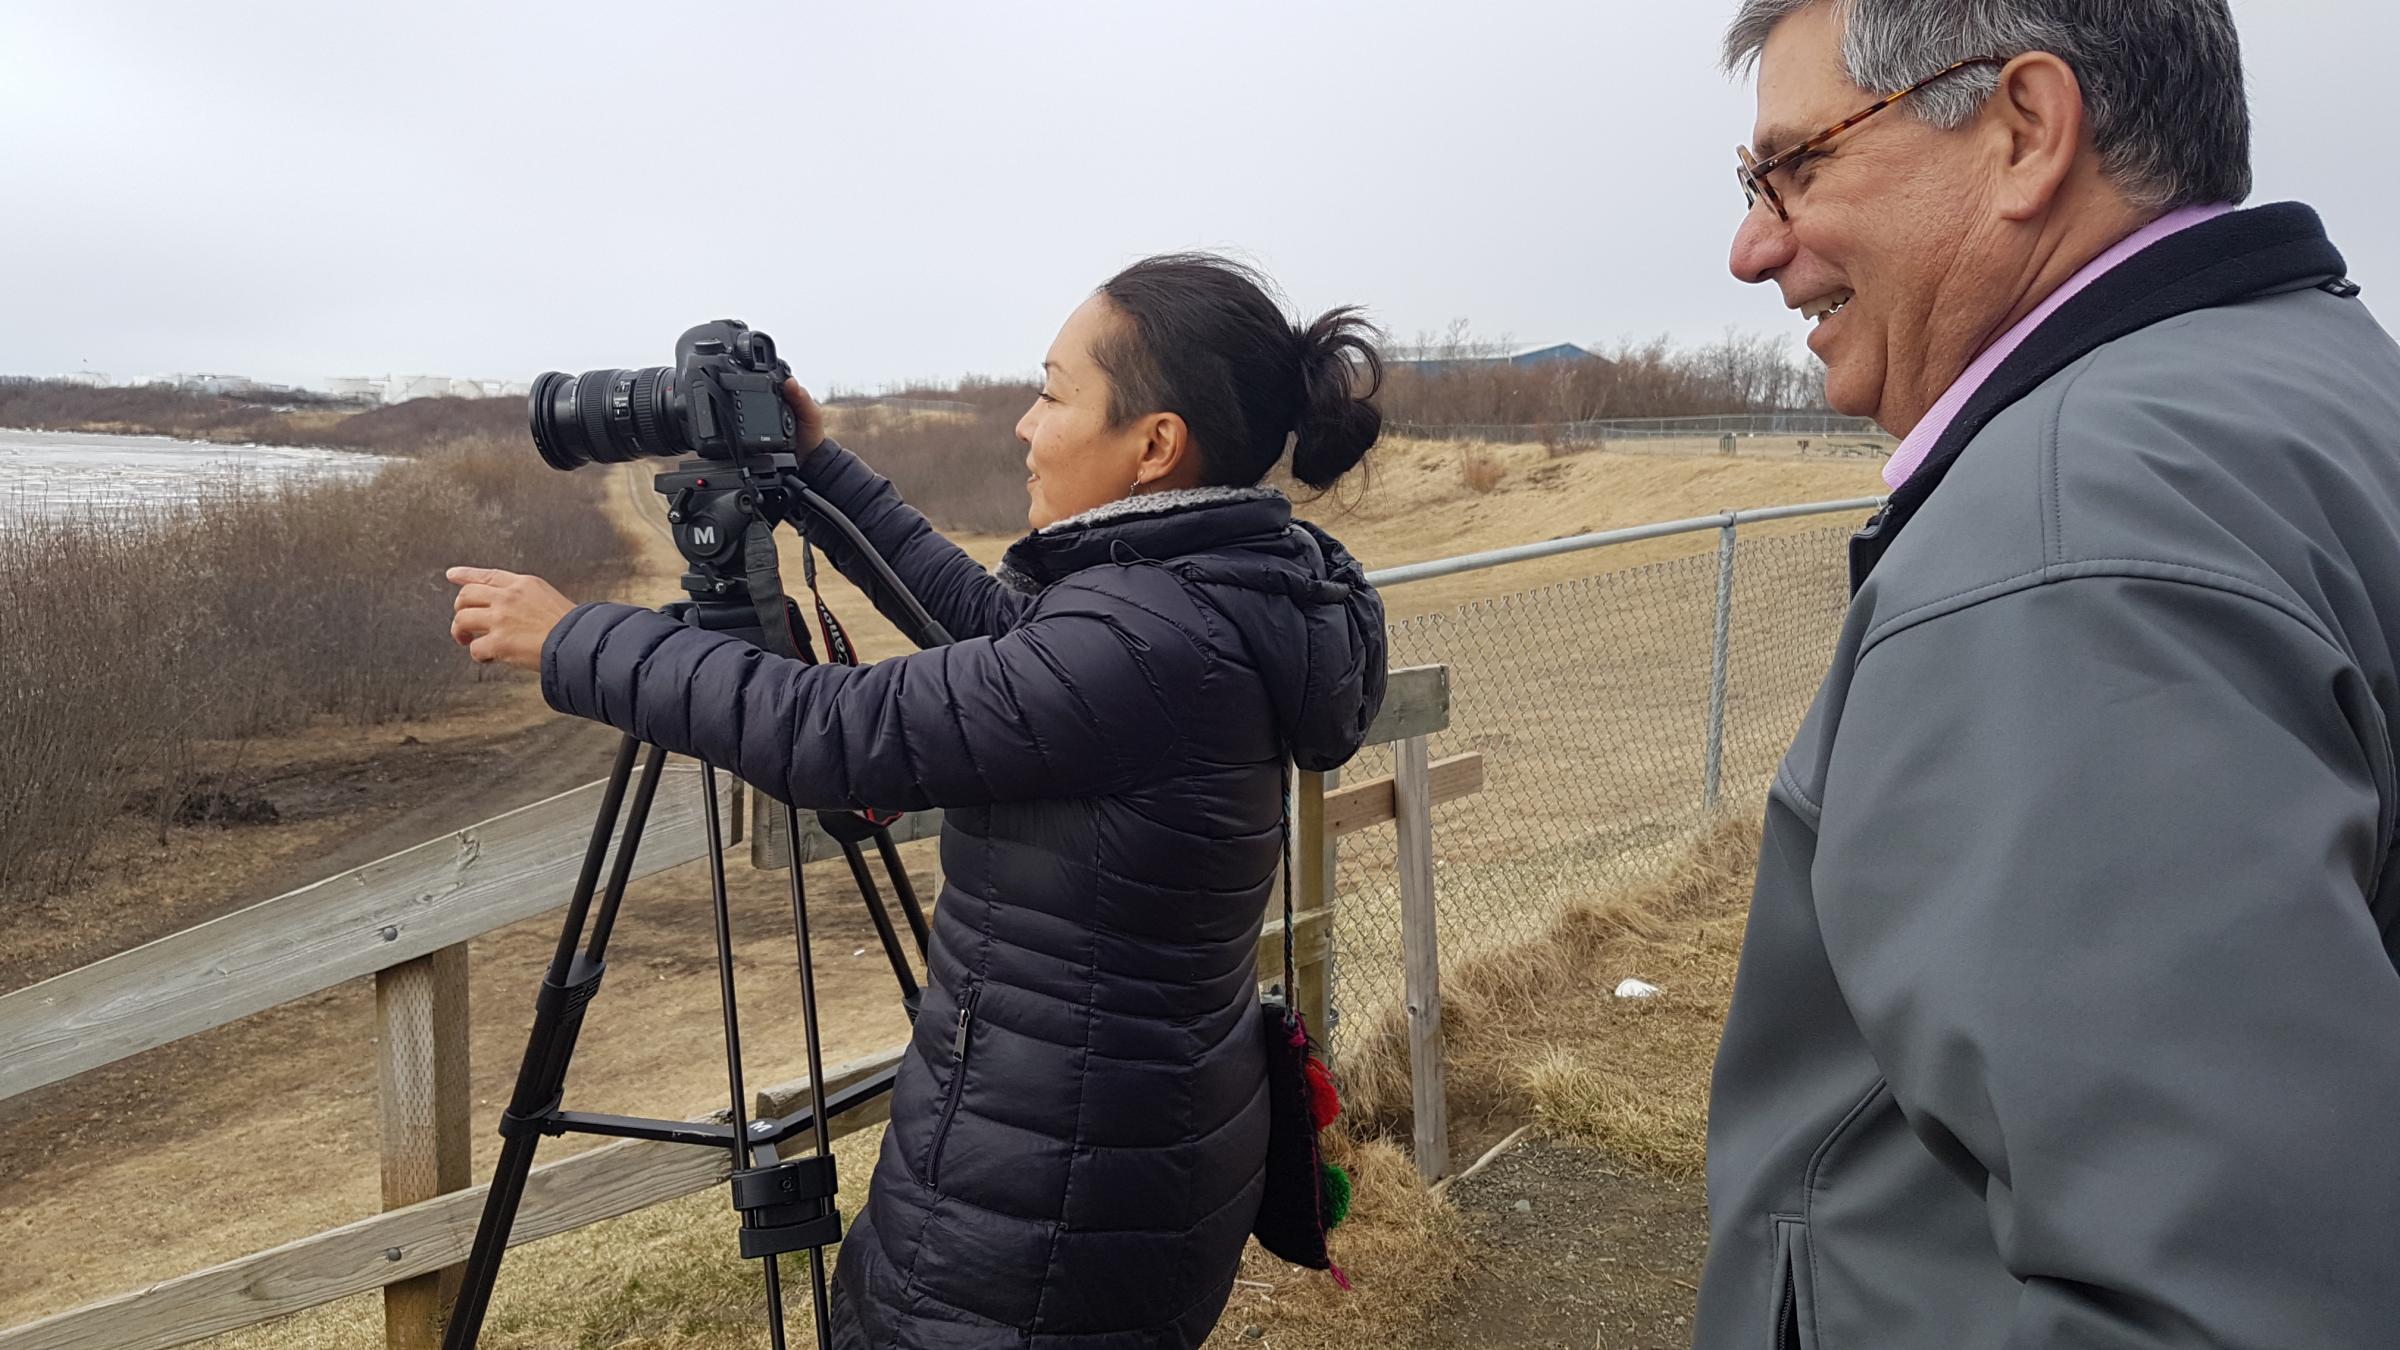 Videographer Jacqueline Cleveland, left, films the Kuskokwim River on May 3, 2018, with Mark Trahant as they report on the Dental Health Aide Therapist Program in Bethel. (Photo by Christine Trudeau/KYUK)